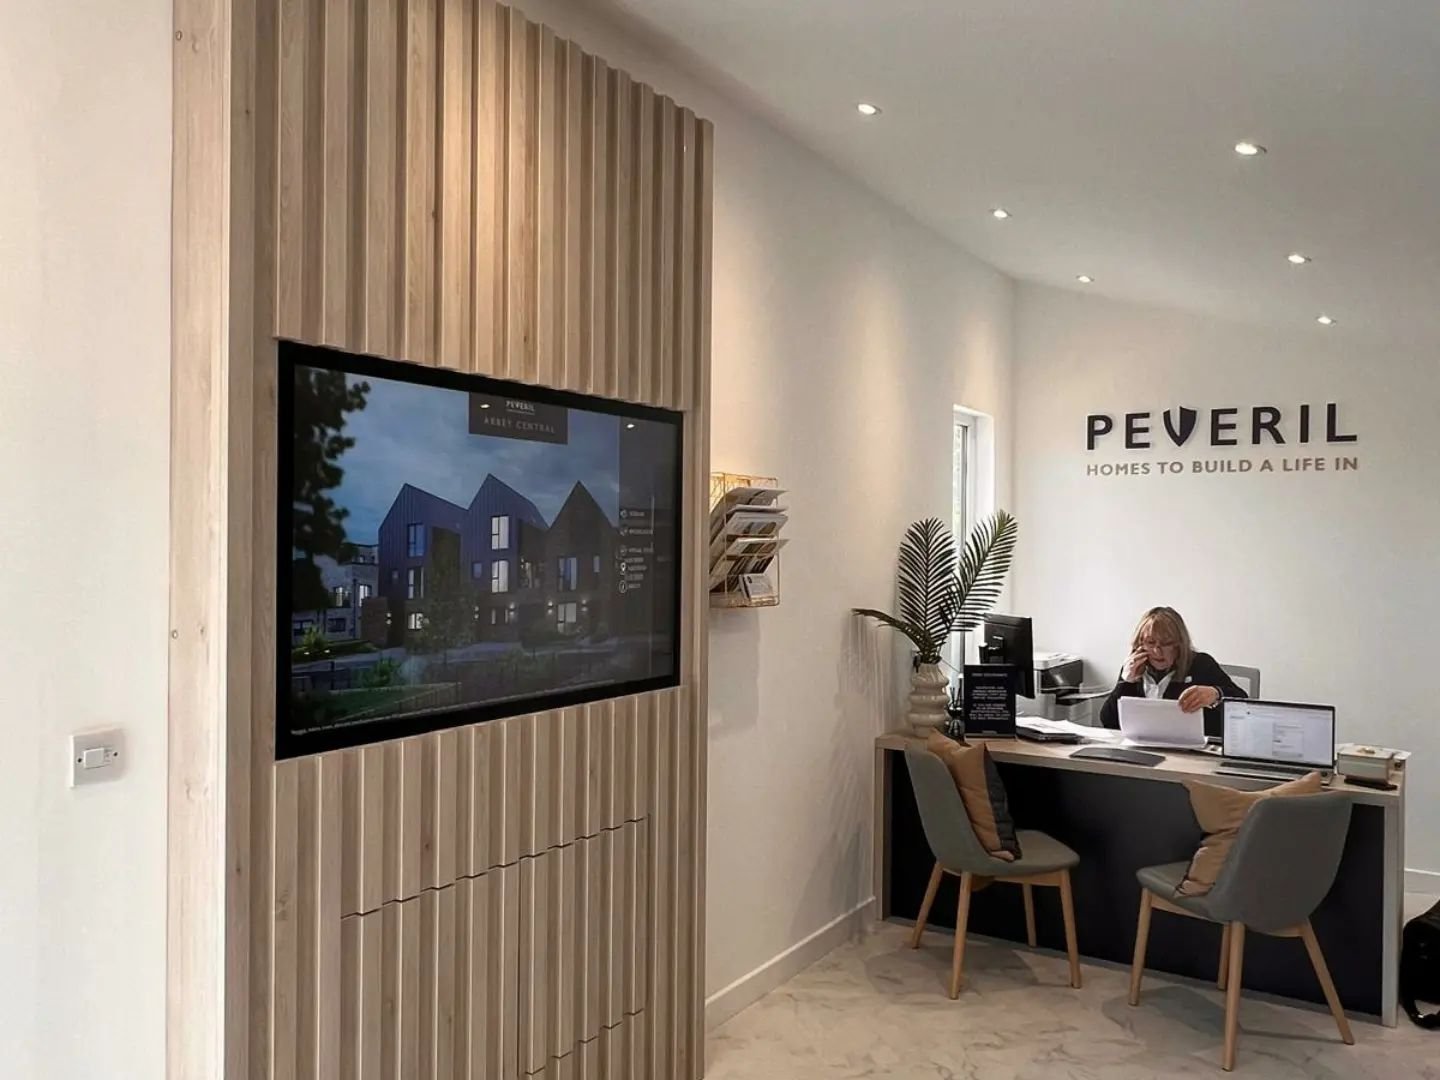 ⭐Unveiling Abbey Central ⭐

We were delighted to receive these photographs from our wonderful client, @peverilhomes following the launch of their West Bridgford development, Abbey Central, in collaboration with @stagfieldnewhomes

The team at White C